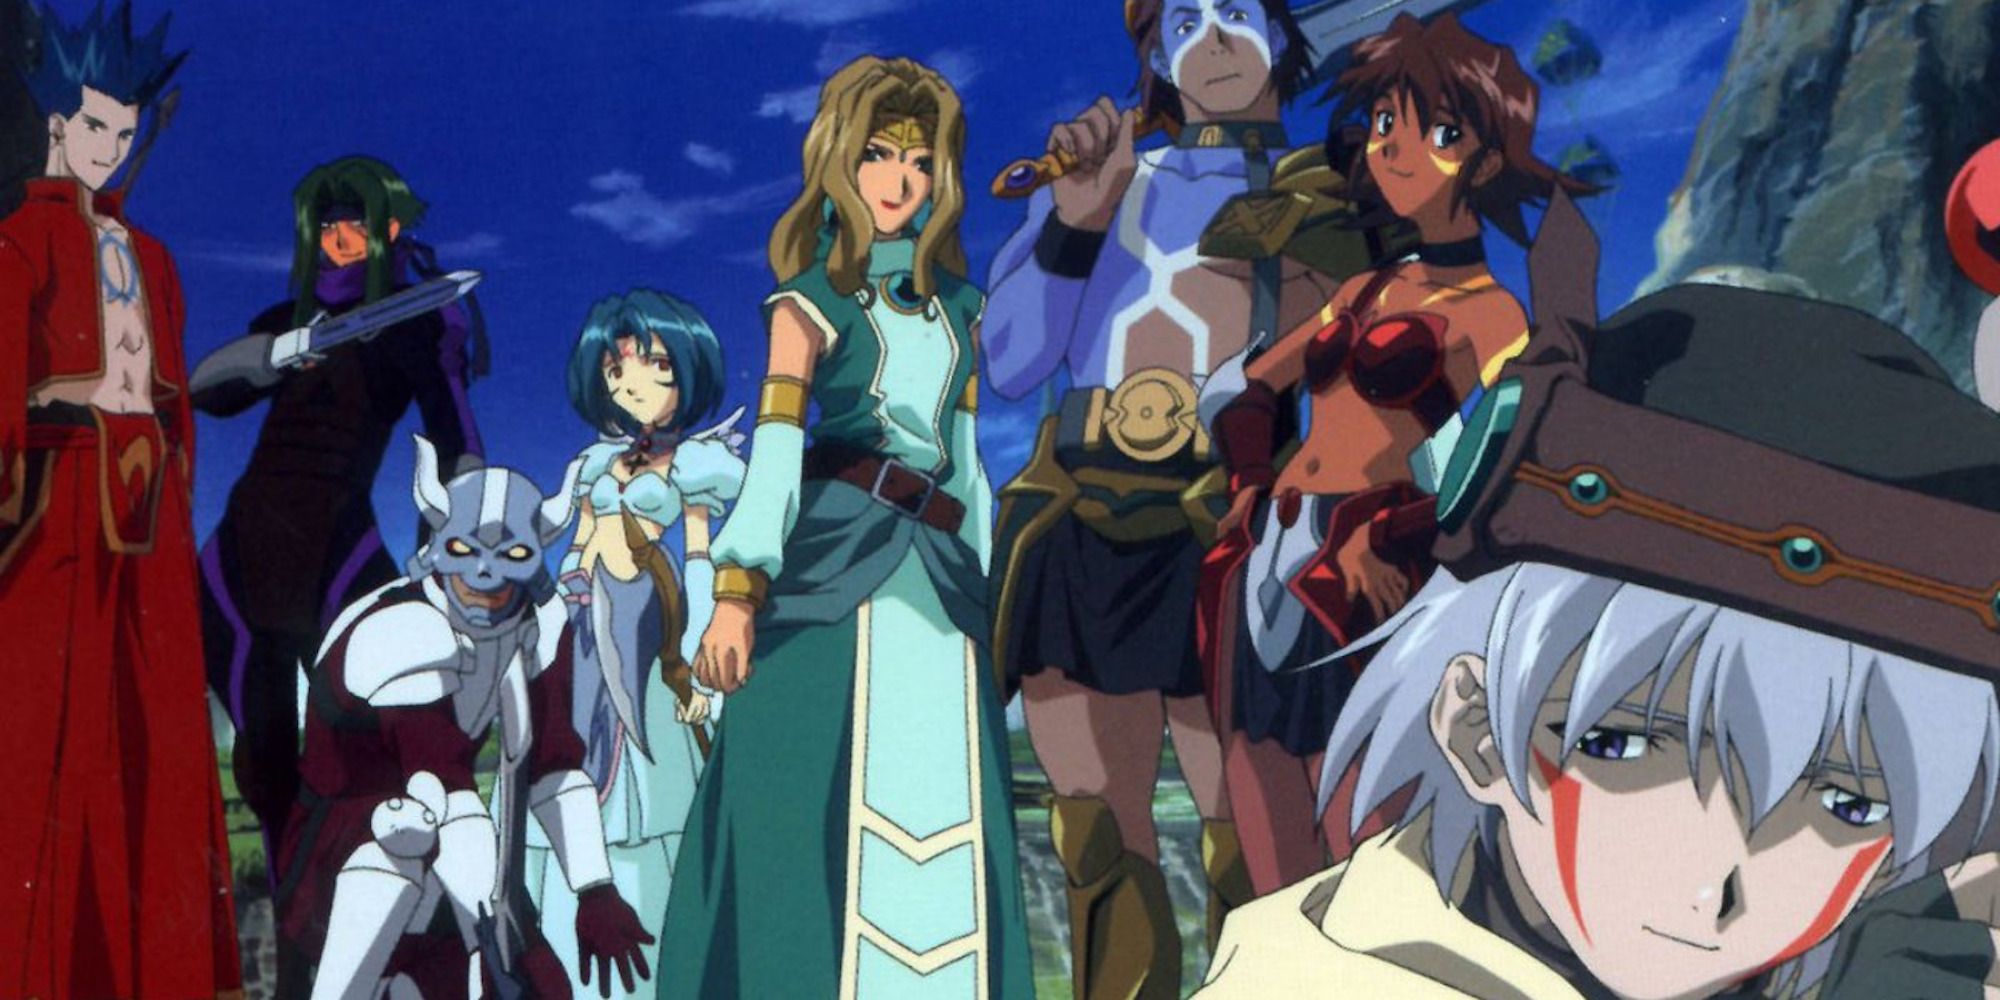 The cast of .hack//Sign